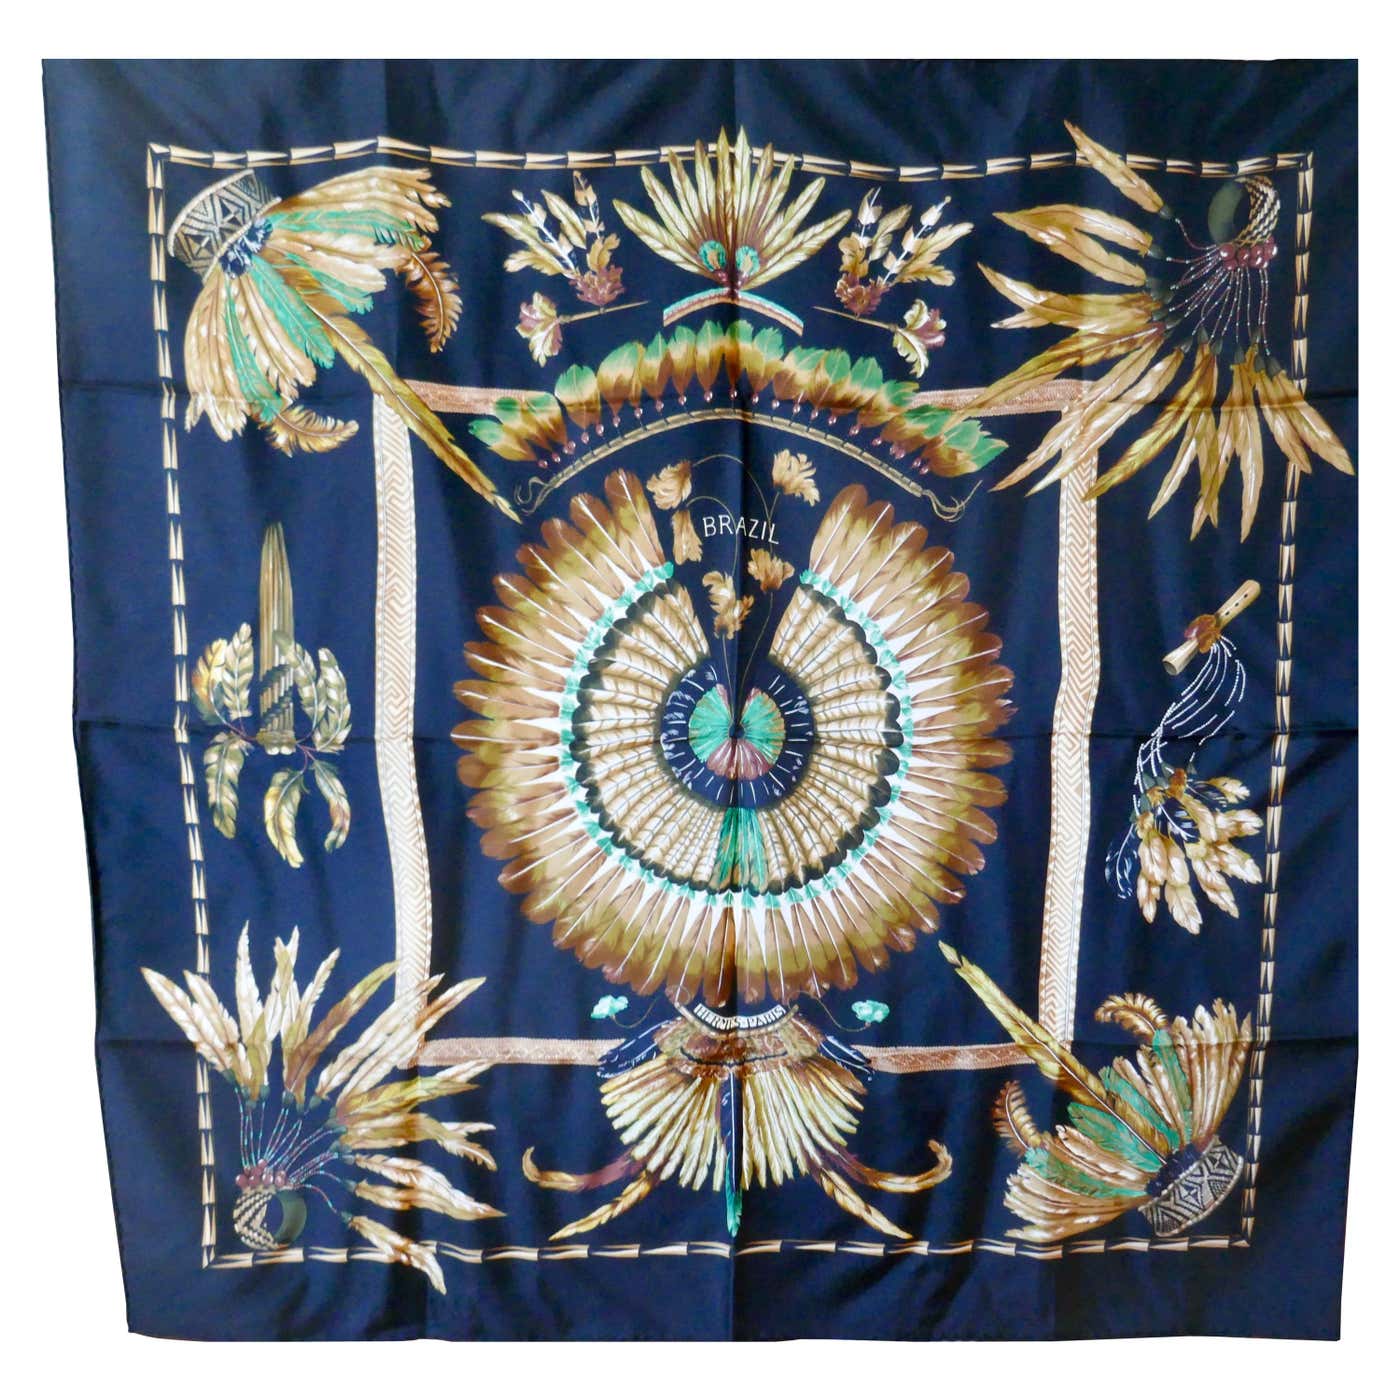 World Famous Hermes Silk Scarf “Brazil” by Laurence Bourthoumieux, 2001 ...